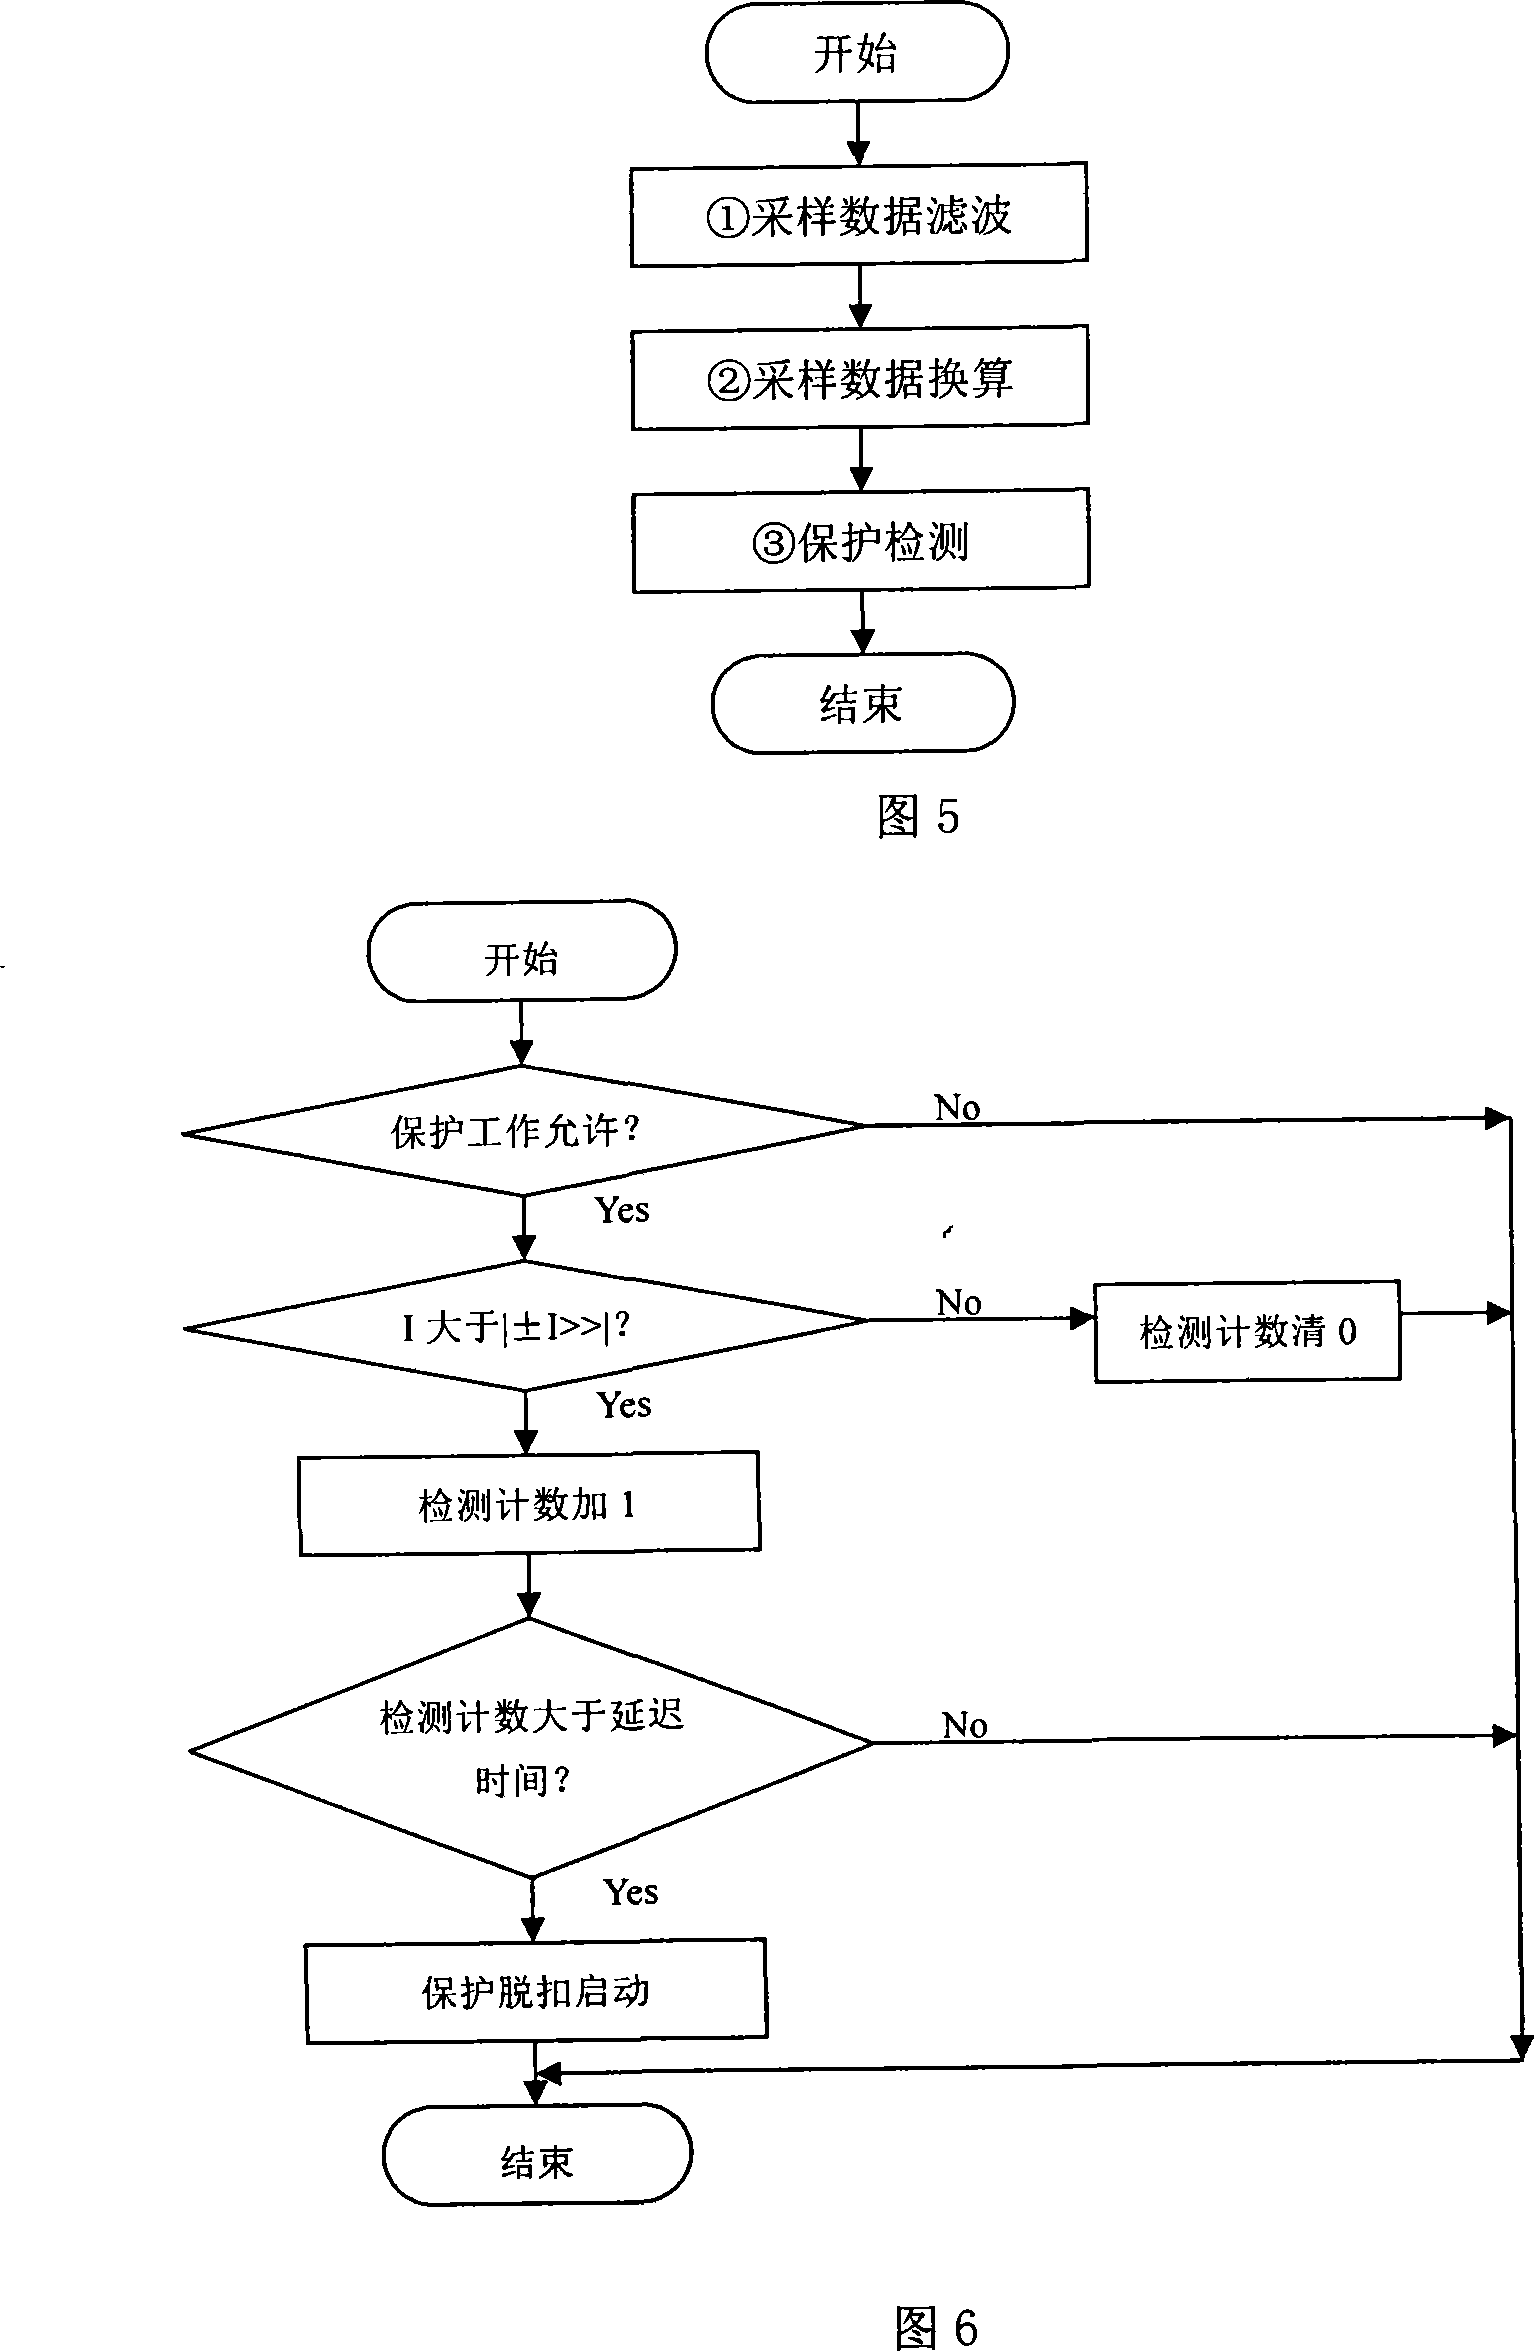 Apparatus and method for implementation of orbit traffic direct current feed protection